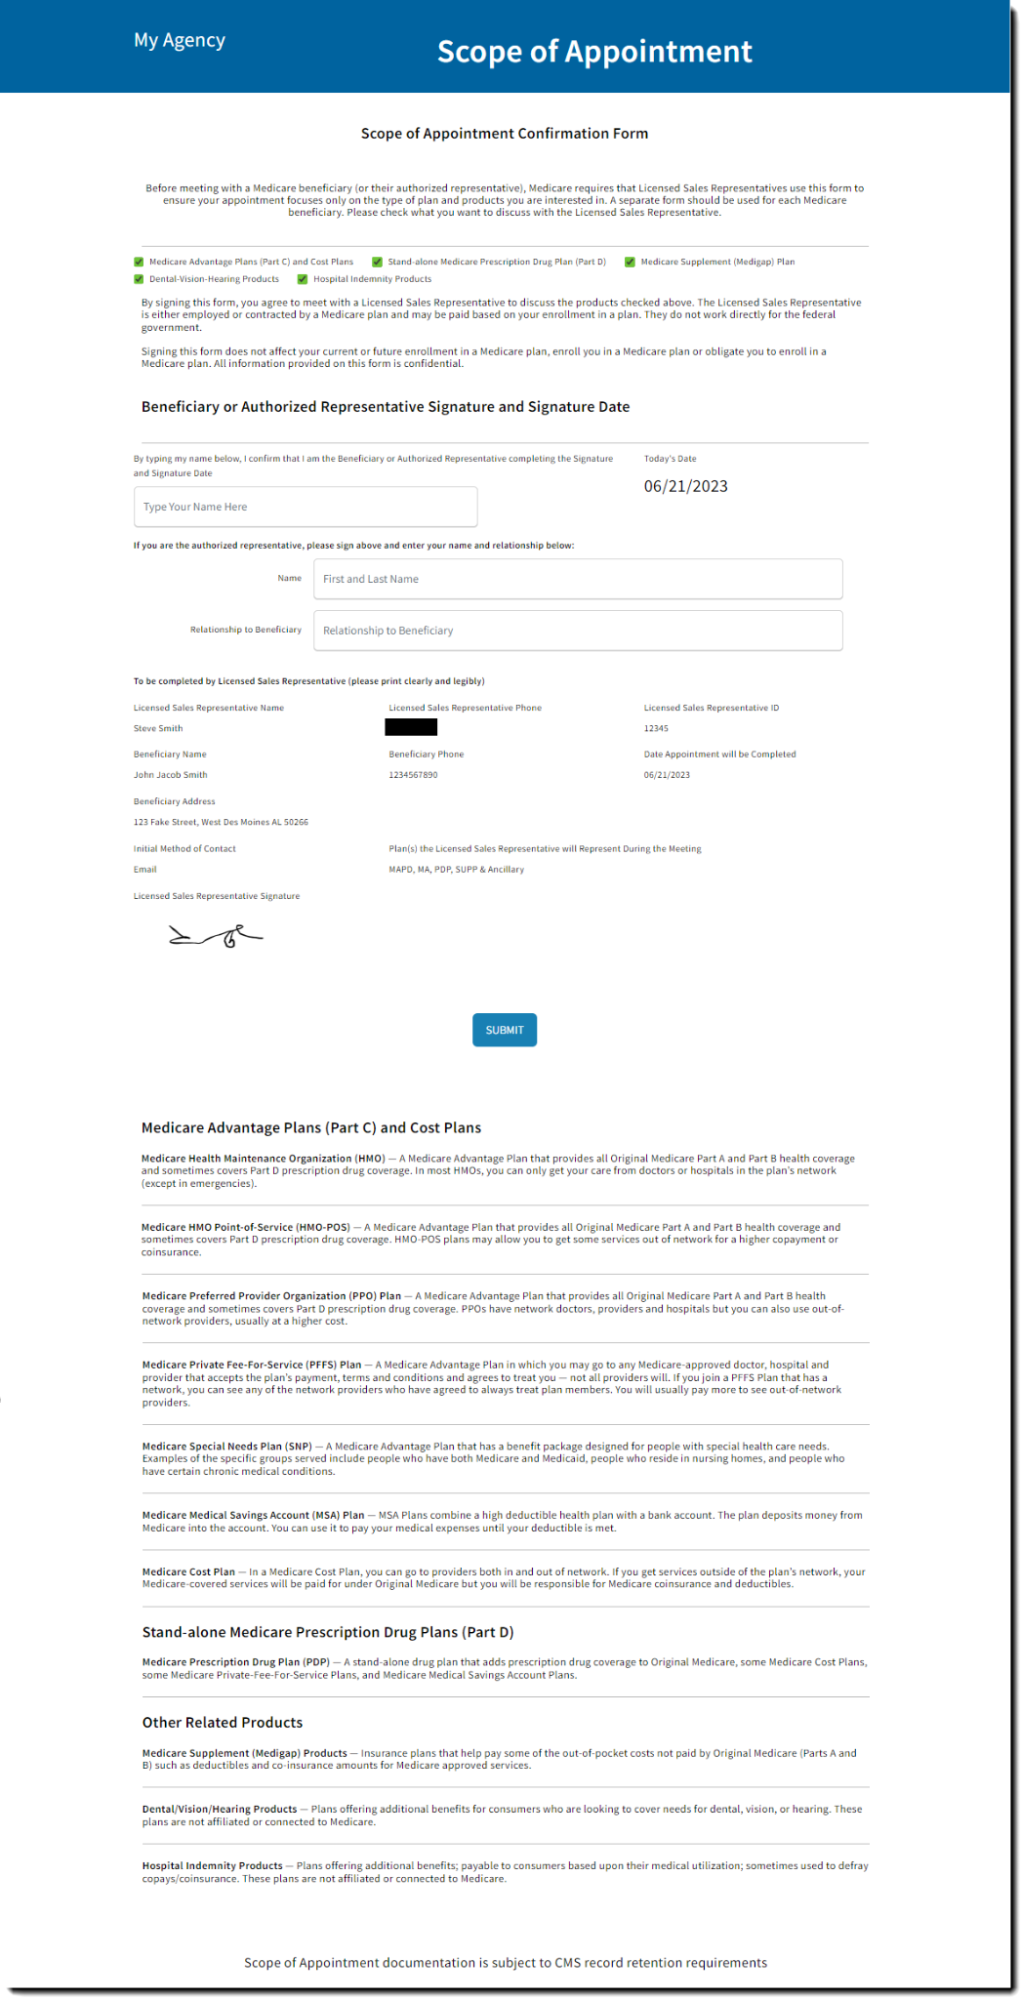 Screenshot showing the SOA Confirmation Form that the lead will receive